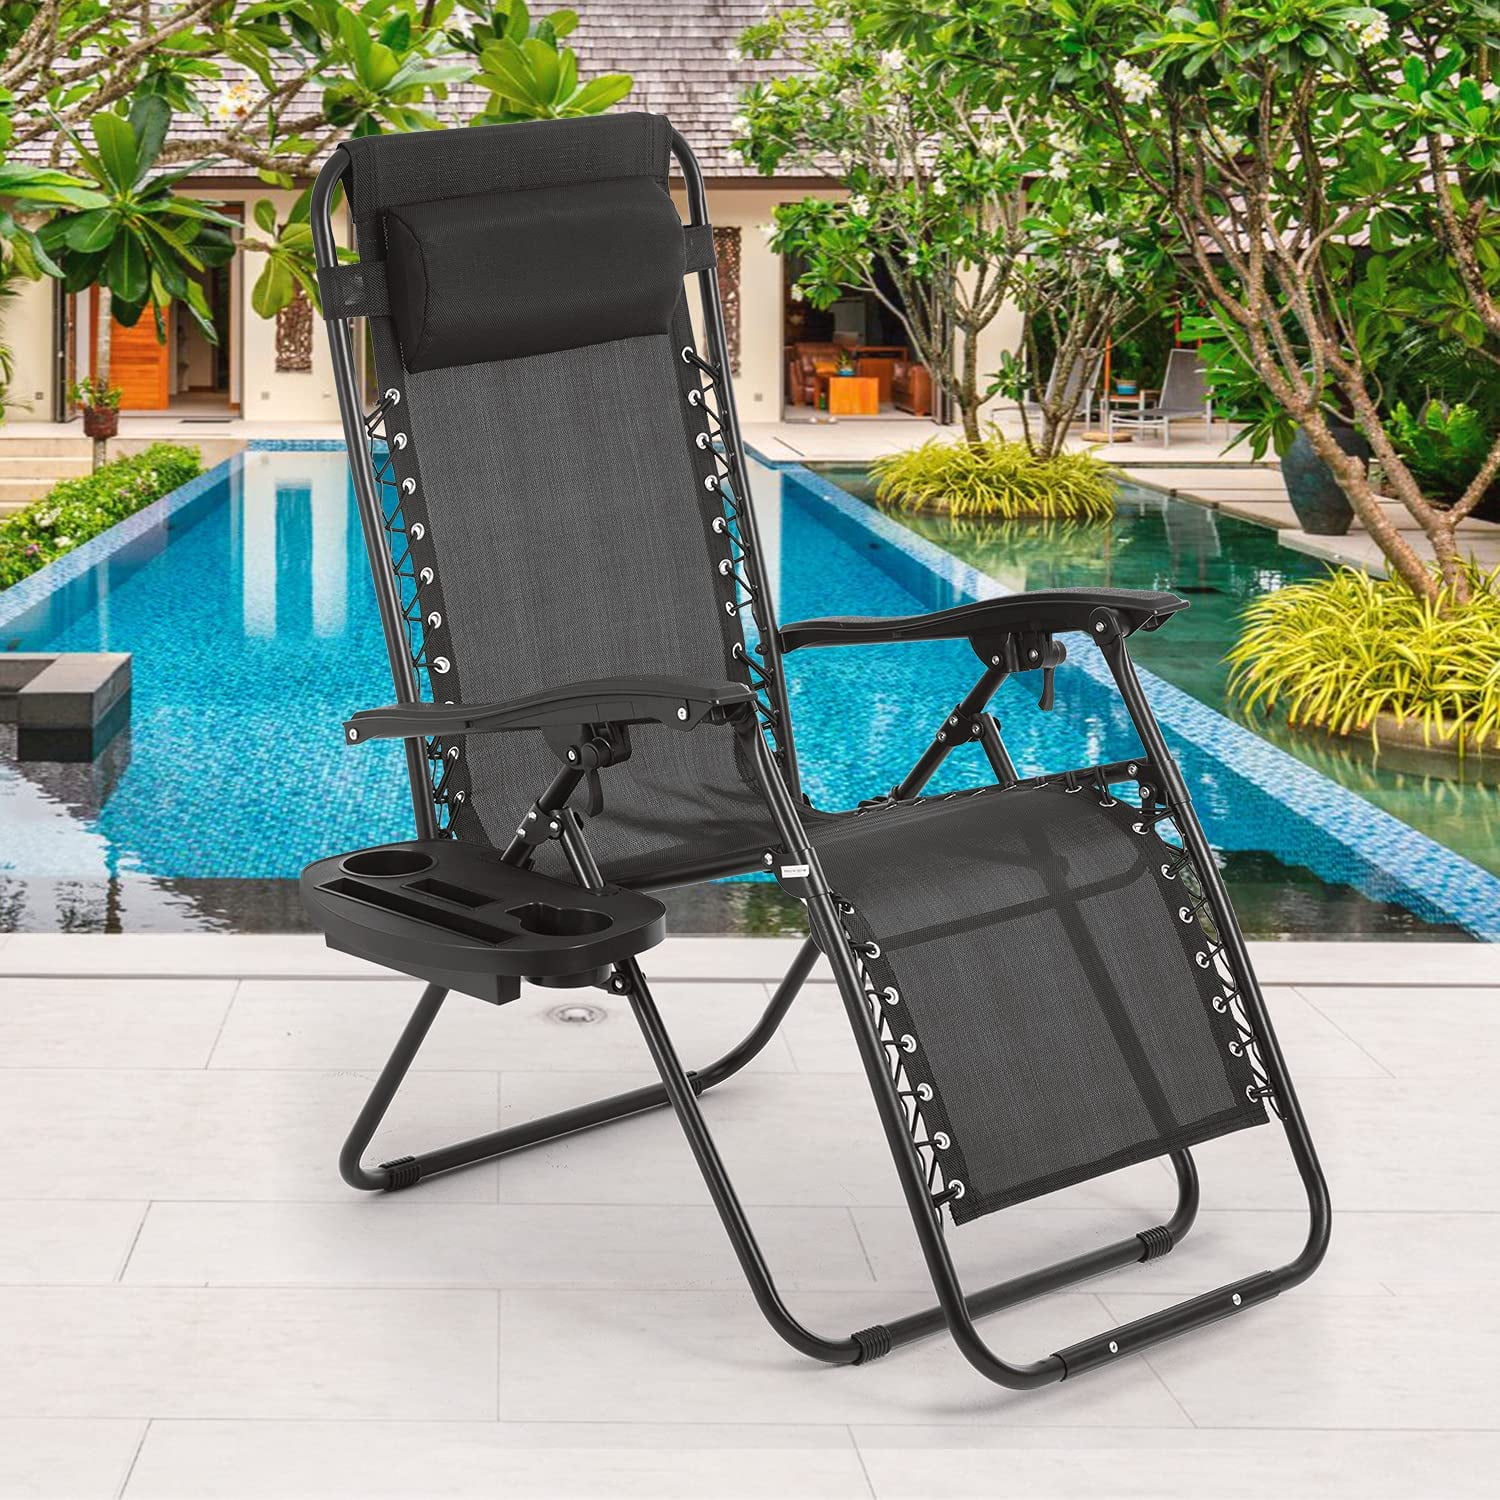 Zero Gravity Patio Lounger Chair XL Padded Adjustable Recliner w/ Head Cushion 